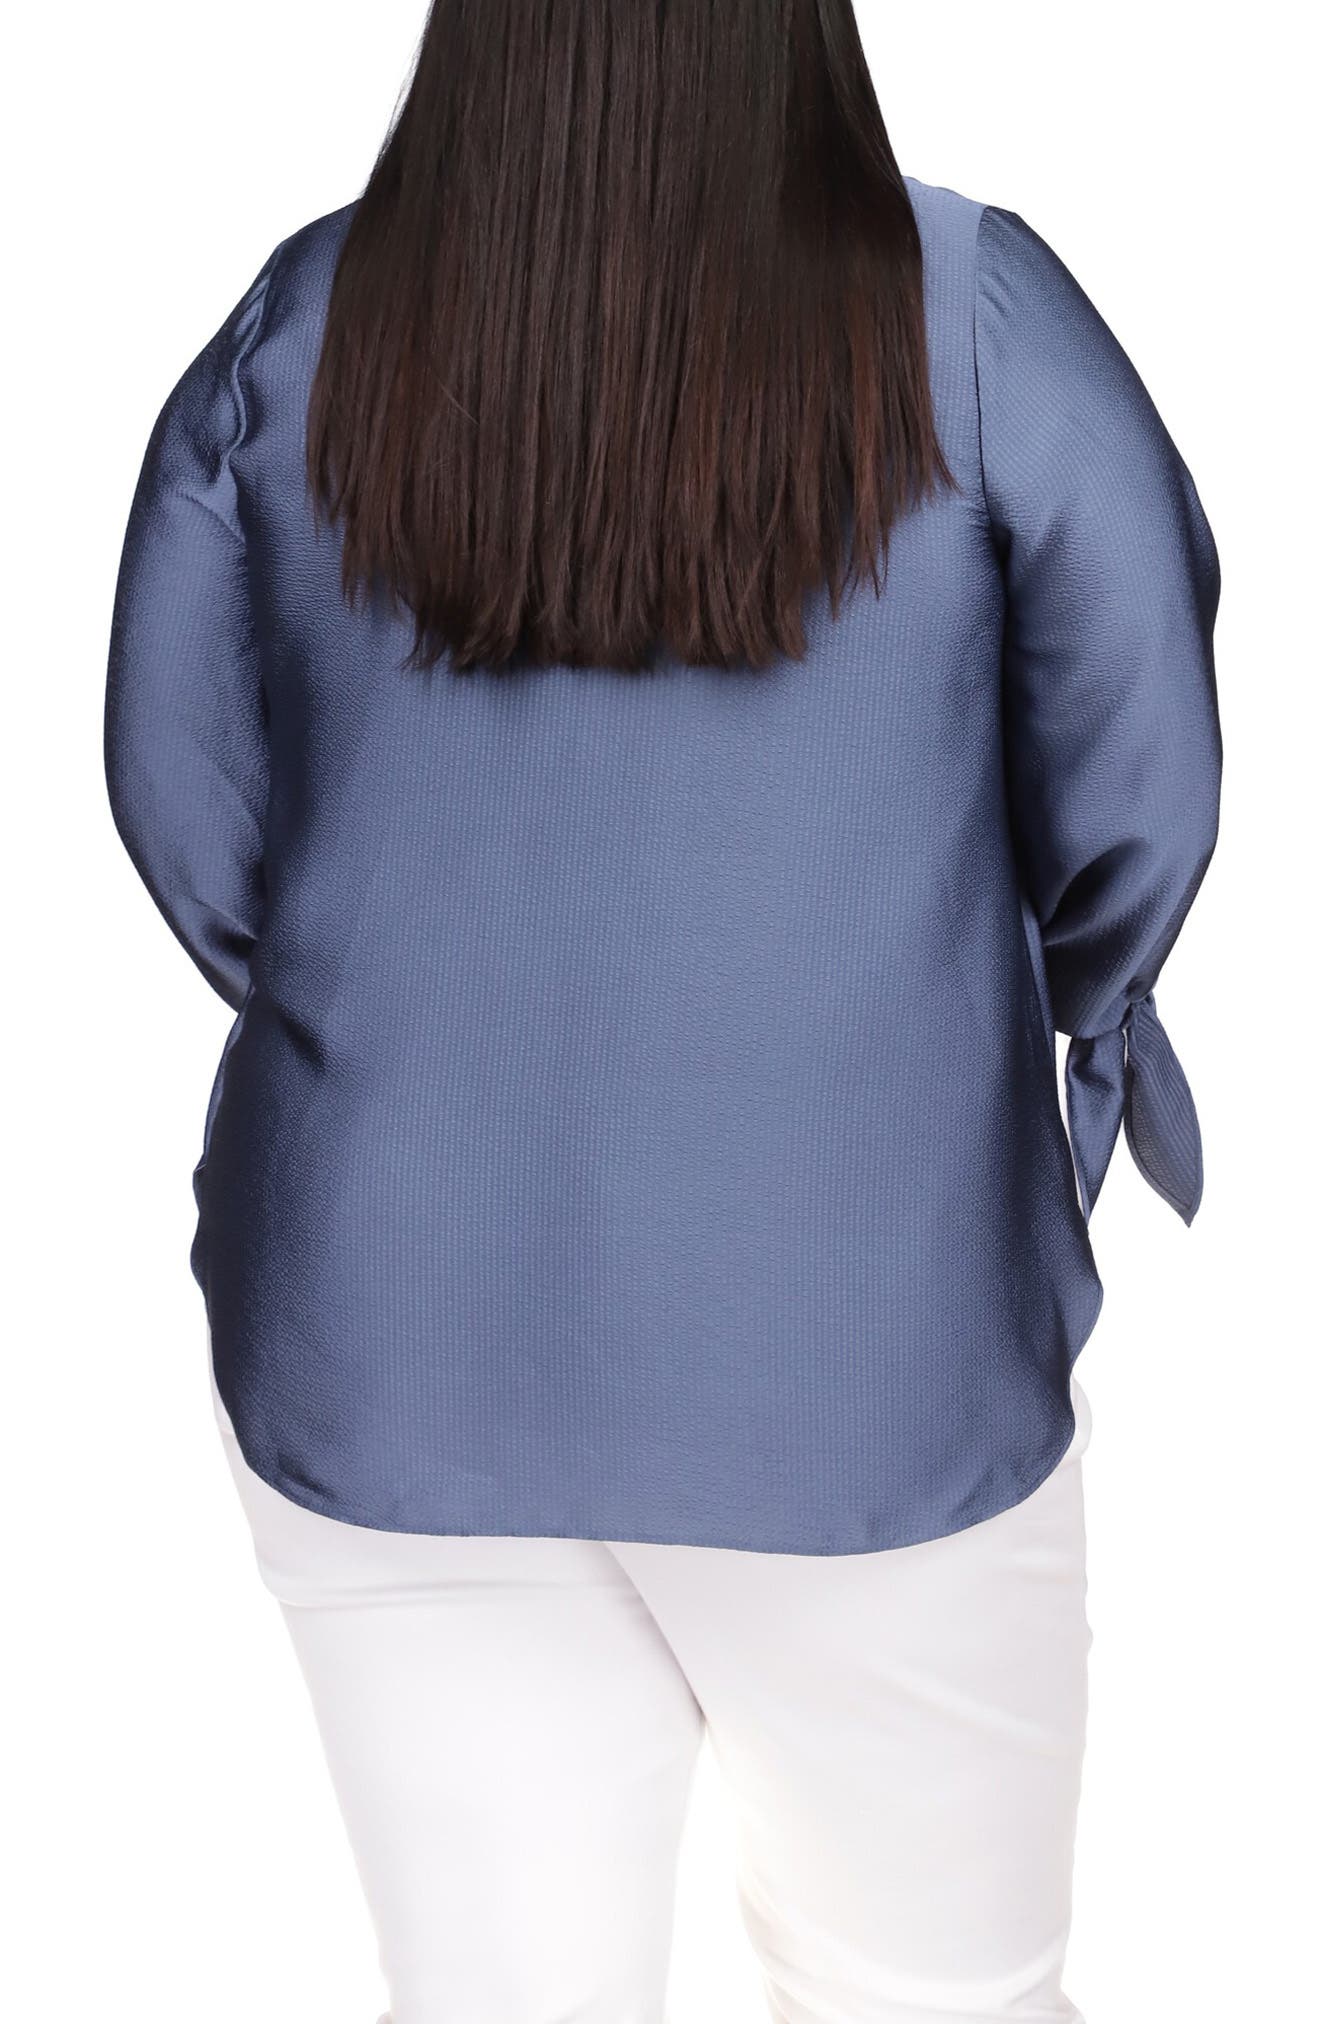 Michael Kors Tie Sleeve Satin Tunic Top in Dk Chambray